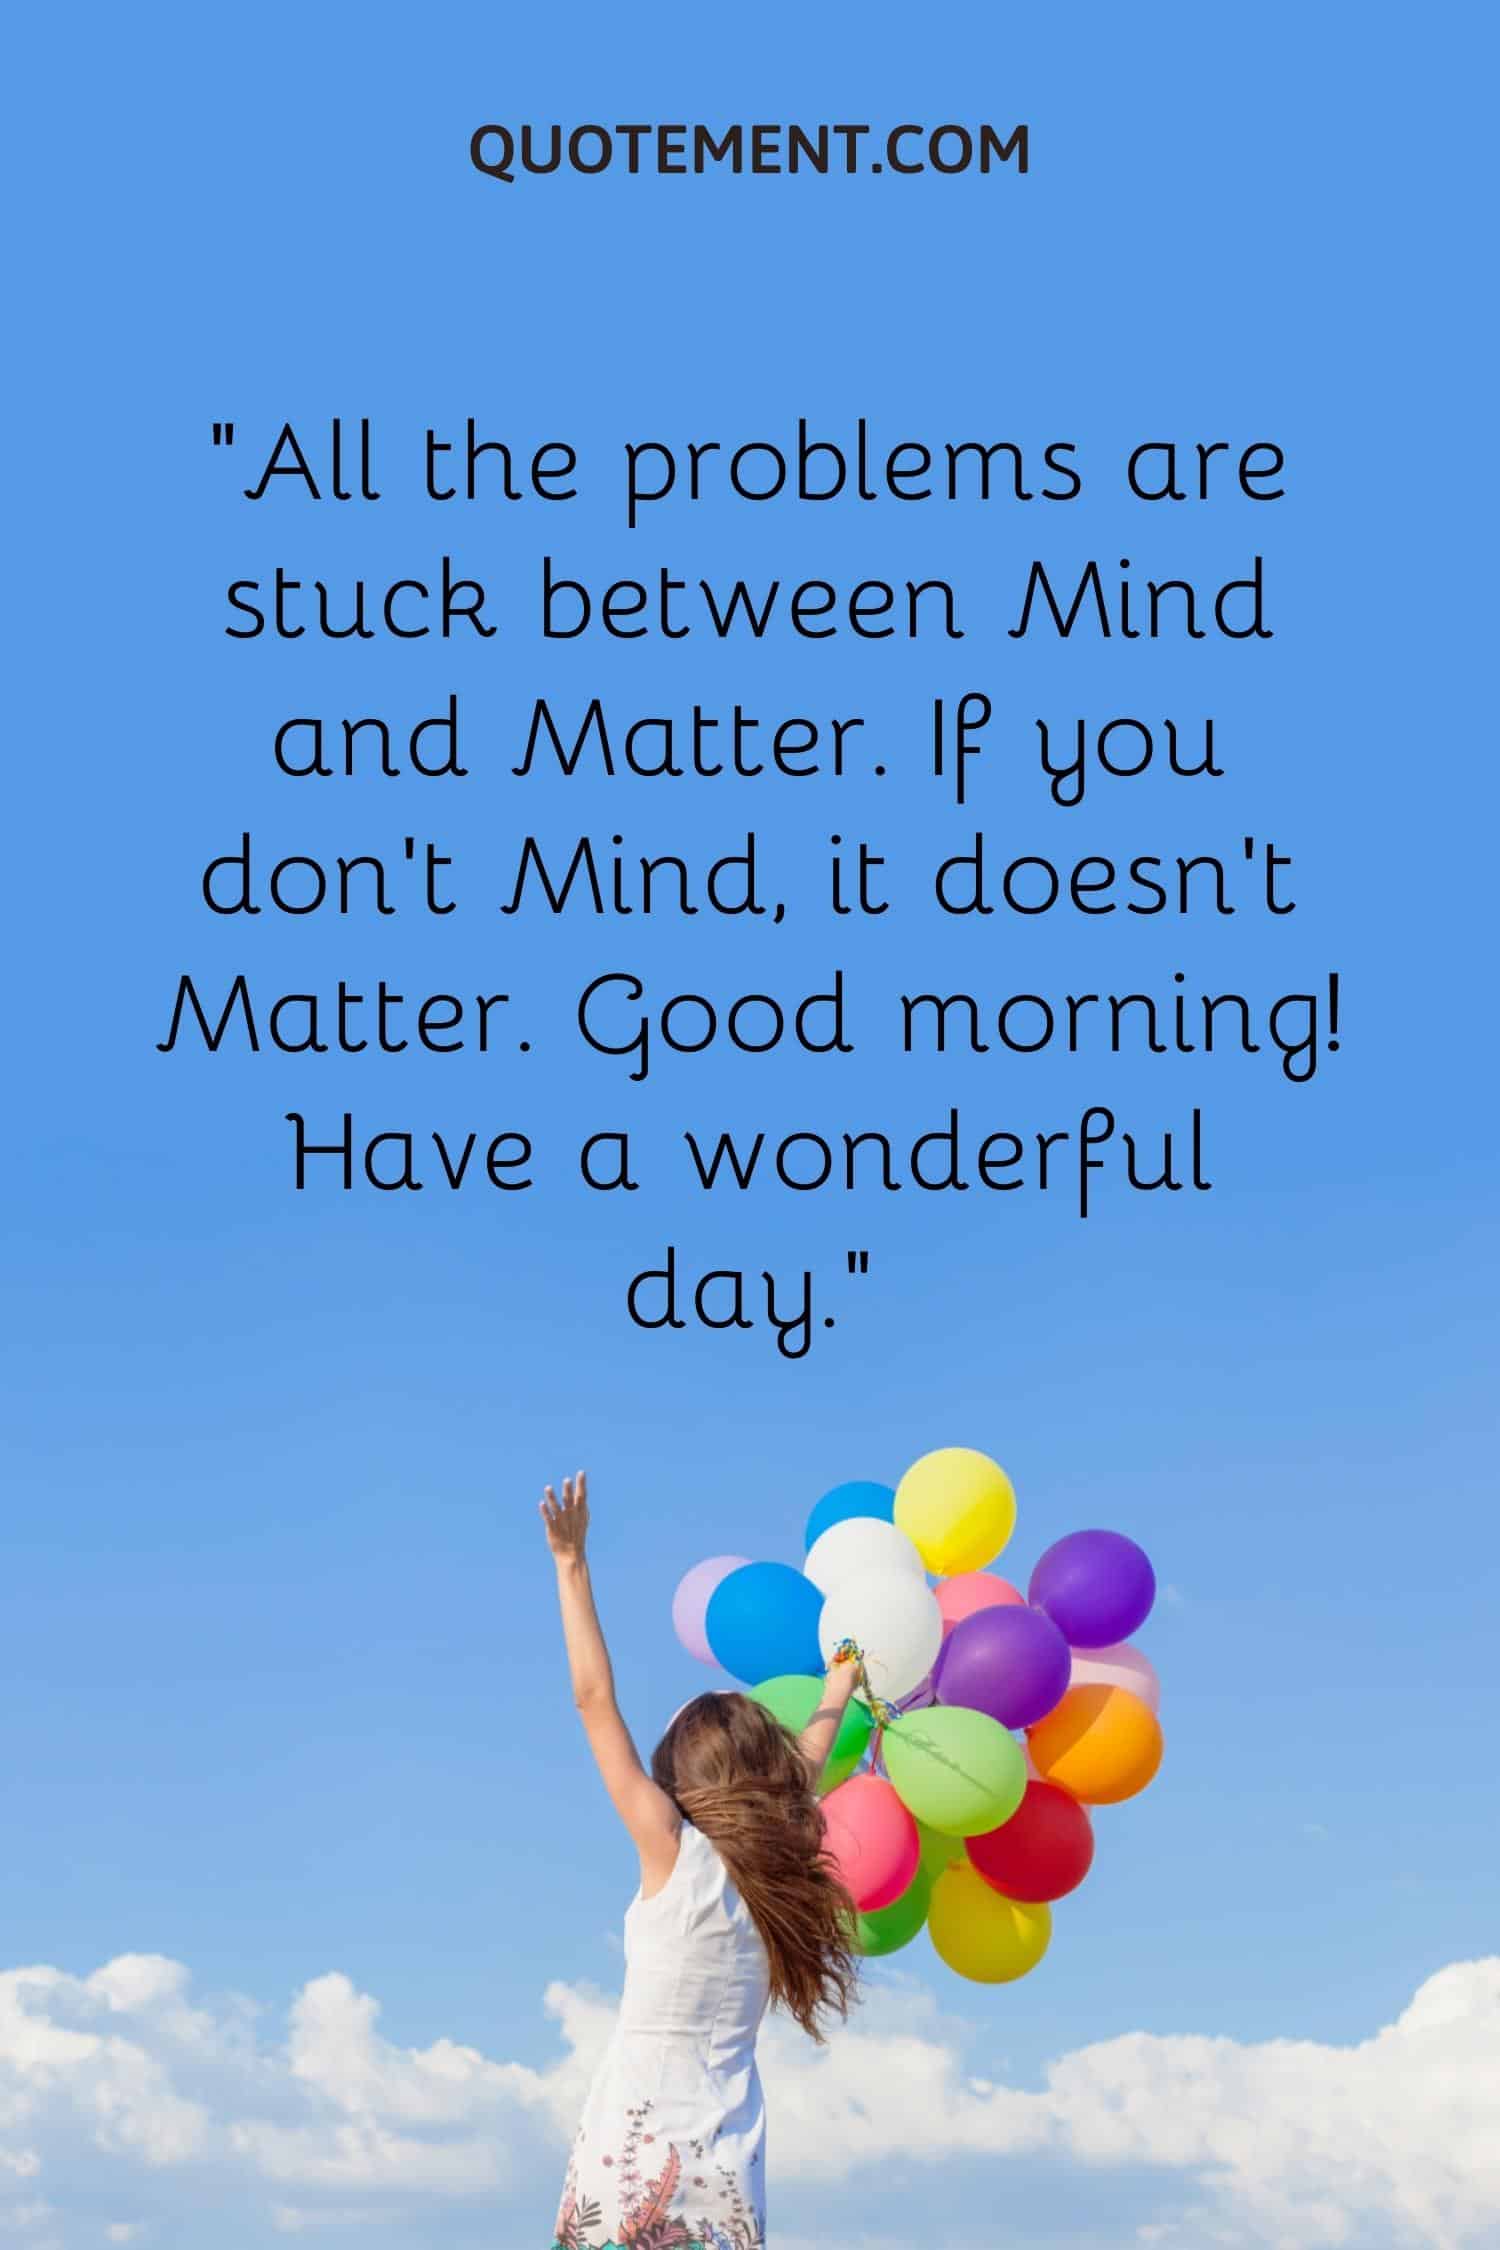 All the problems are stuck between Mind and Matter. If you don’t Mind, it doesn’t Matter